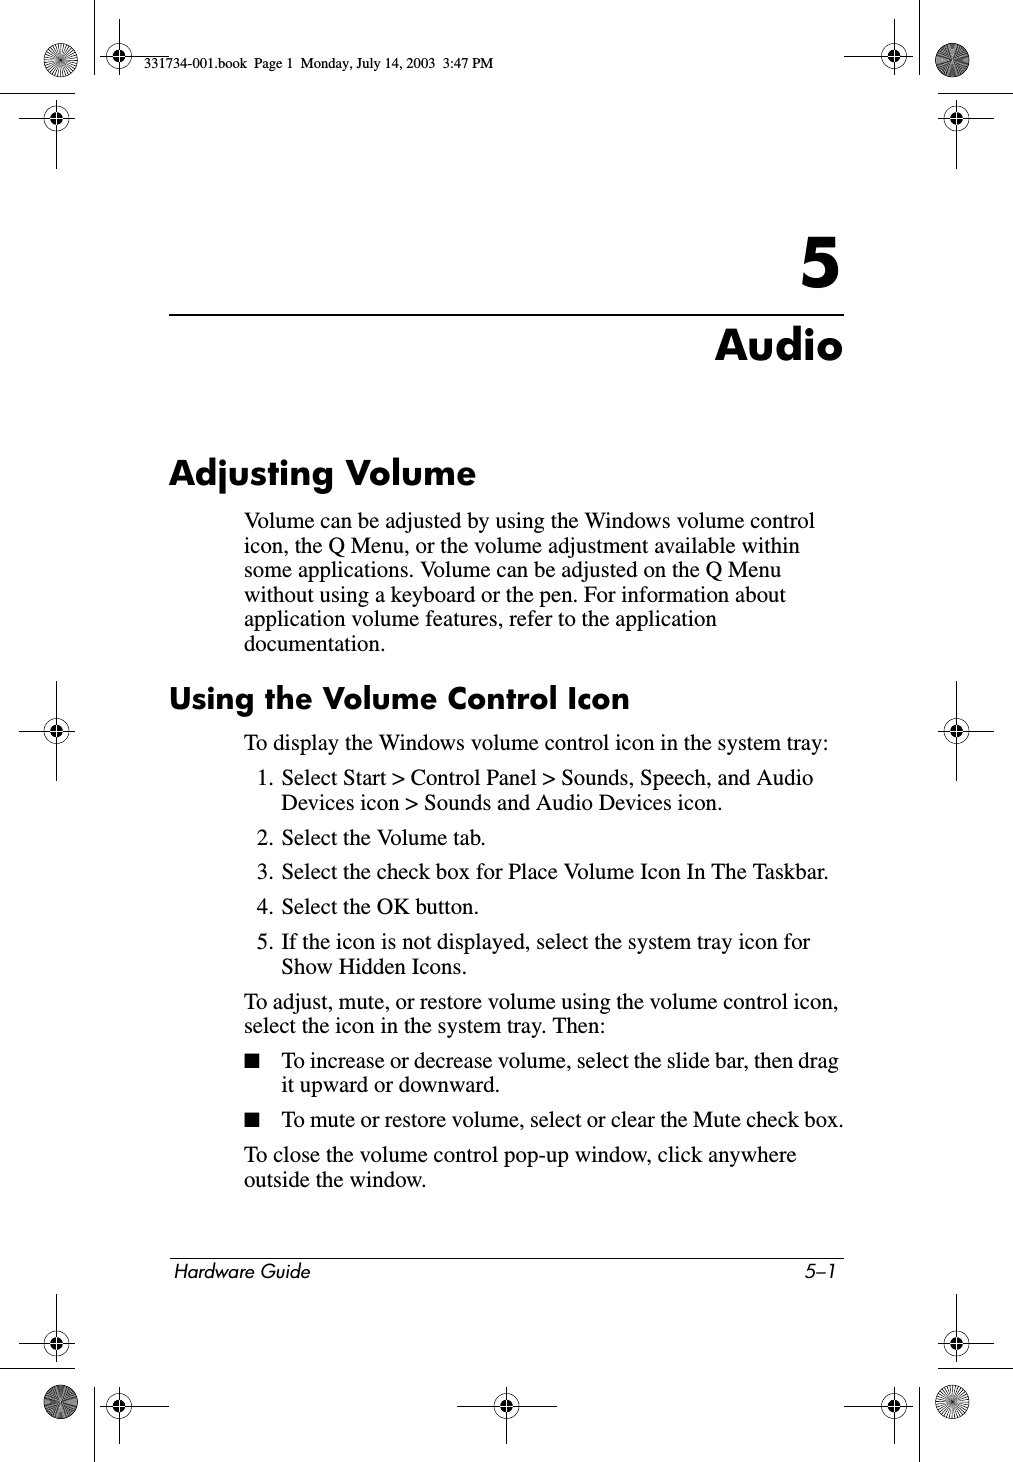 Hardware Guide 5–15AudioAdjusting VolumeVolume can be adjusted by using the Windows volume control icon, the Q Menu, or the volume adjustment available within some applications. Volume can be adjusted on the Q Menu without using a keyboard or the pen. For information about application volume features, refer to the application documentation.Using the Volume Control IconTo display the Windows volume control icon in the system tray:1. Select Start &gt; Control Panel &gt; Sounds, Speech, and Audio Devices icon &gt; Sounds and Audio Devices icon.2. Select the Volume tab.3. Select the check box for Place Volume Icon In The Taskbar.4. Select the OK button.5. If the icon is not displayed, select the system tray icon for Show Hidden Icons.To adjust, mute, or restore volume using the volume control icon, select the icon in the system tray. Then:■To increase or decrease volume, select the slide bar, then drag it upward or downward.■To mute or restore volume, select or clear the Mute check box.To close the volume control pop-up window, click anywhere outside the window.331734-001.book  Page 1  Monday, July 14, 2003  3:47 PM